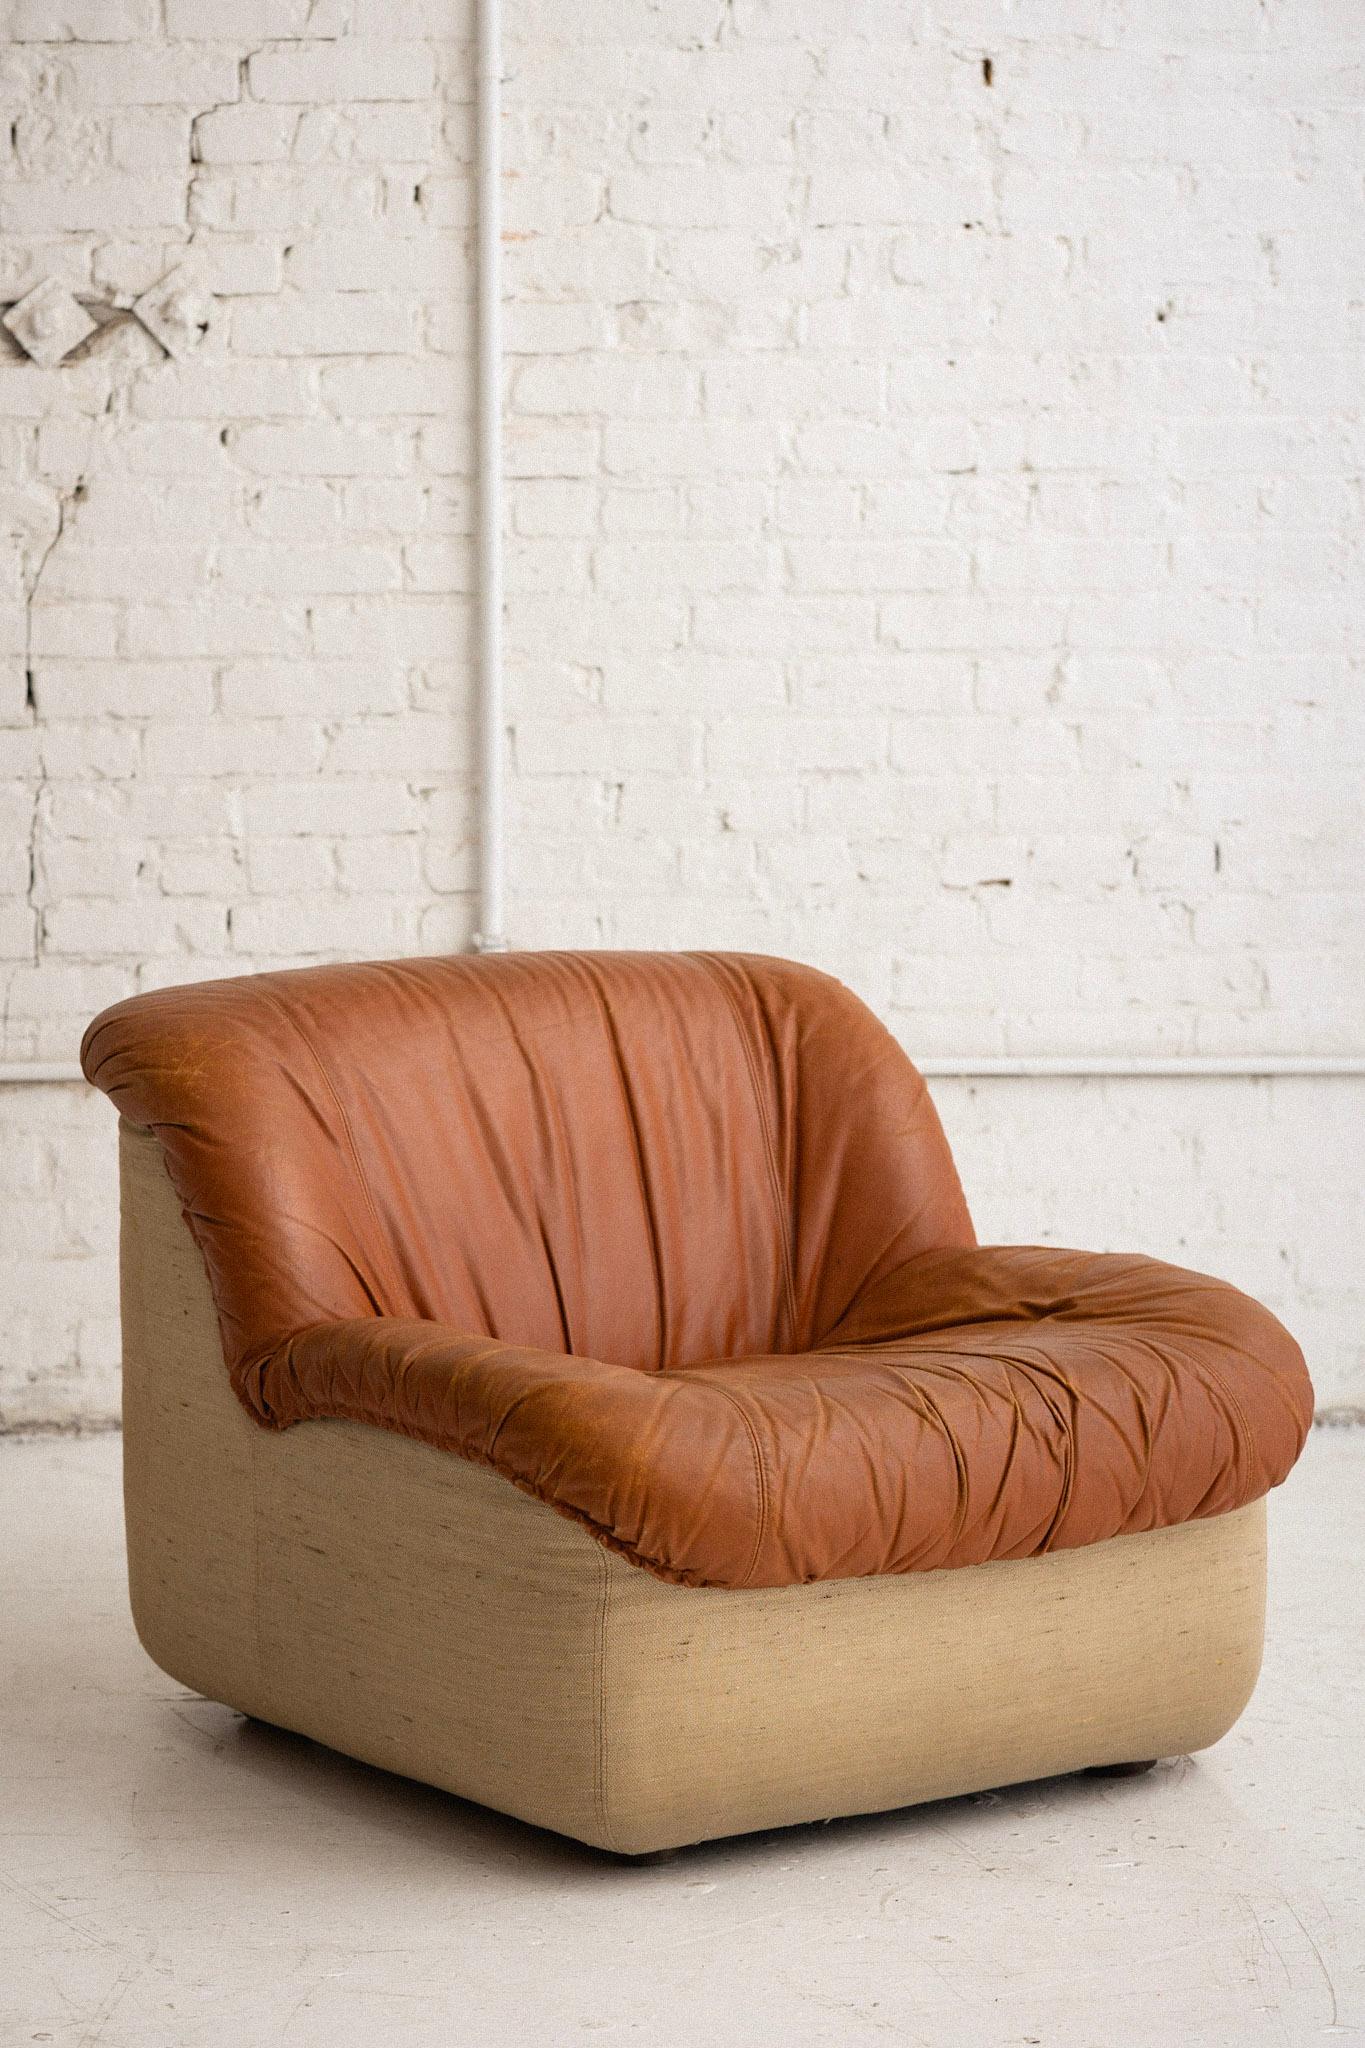 Ère spatiale Henning Korch for Swan 'Caprice' Leather Chair / Modular Seating en vente